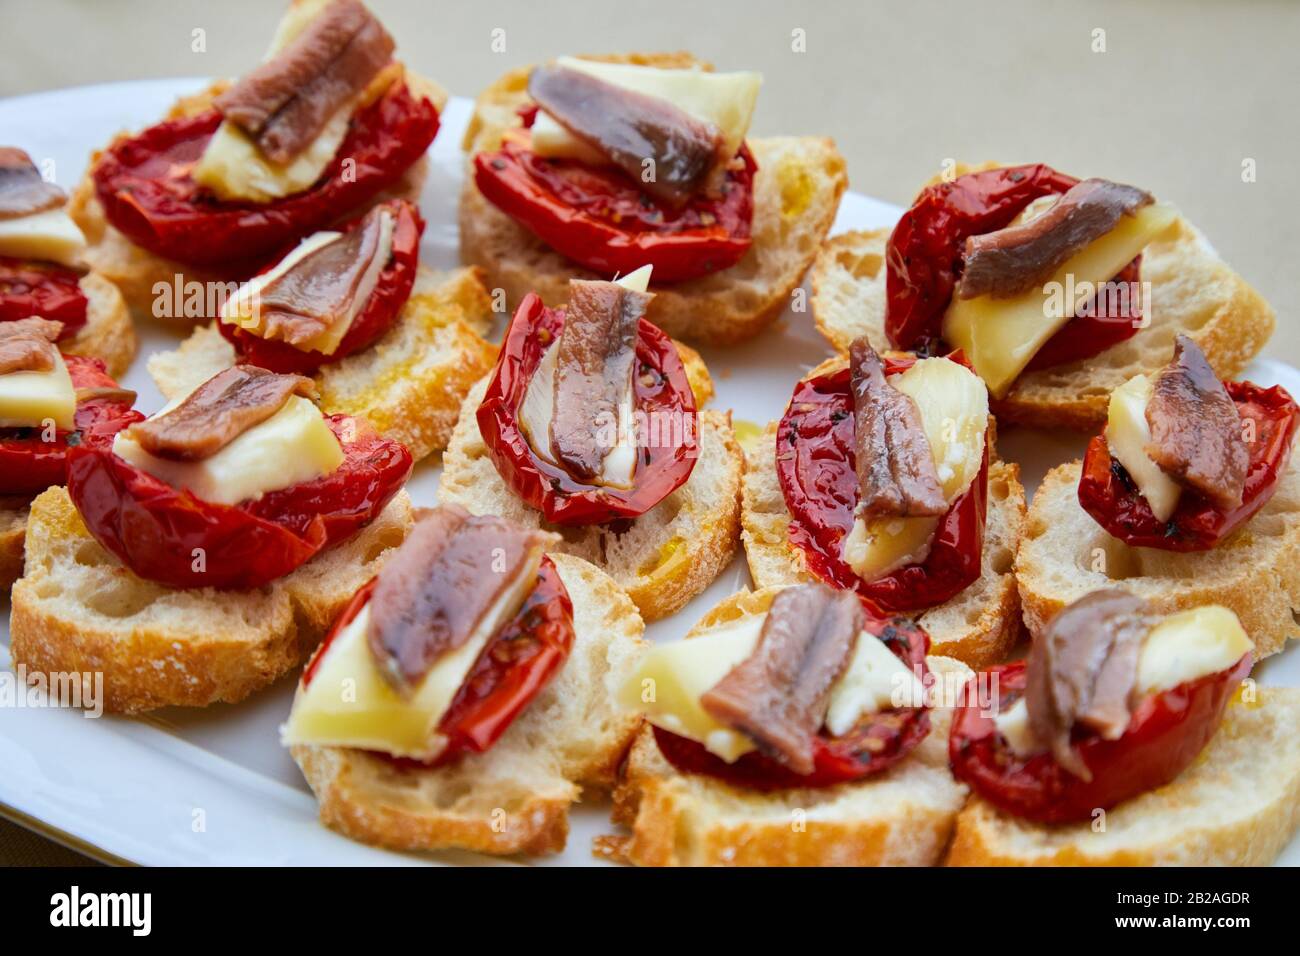 Pintxos, canapes pepper, cheese and anchovy, Gipuzkoa, Basque Country, Spain, Europe Stock Photo